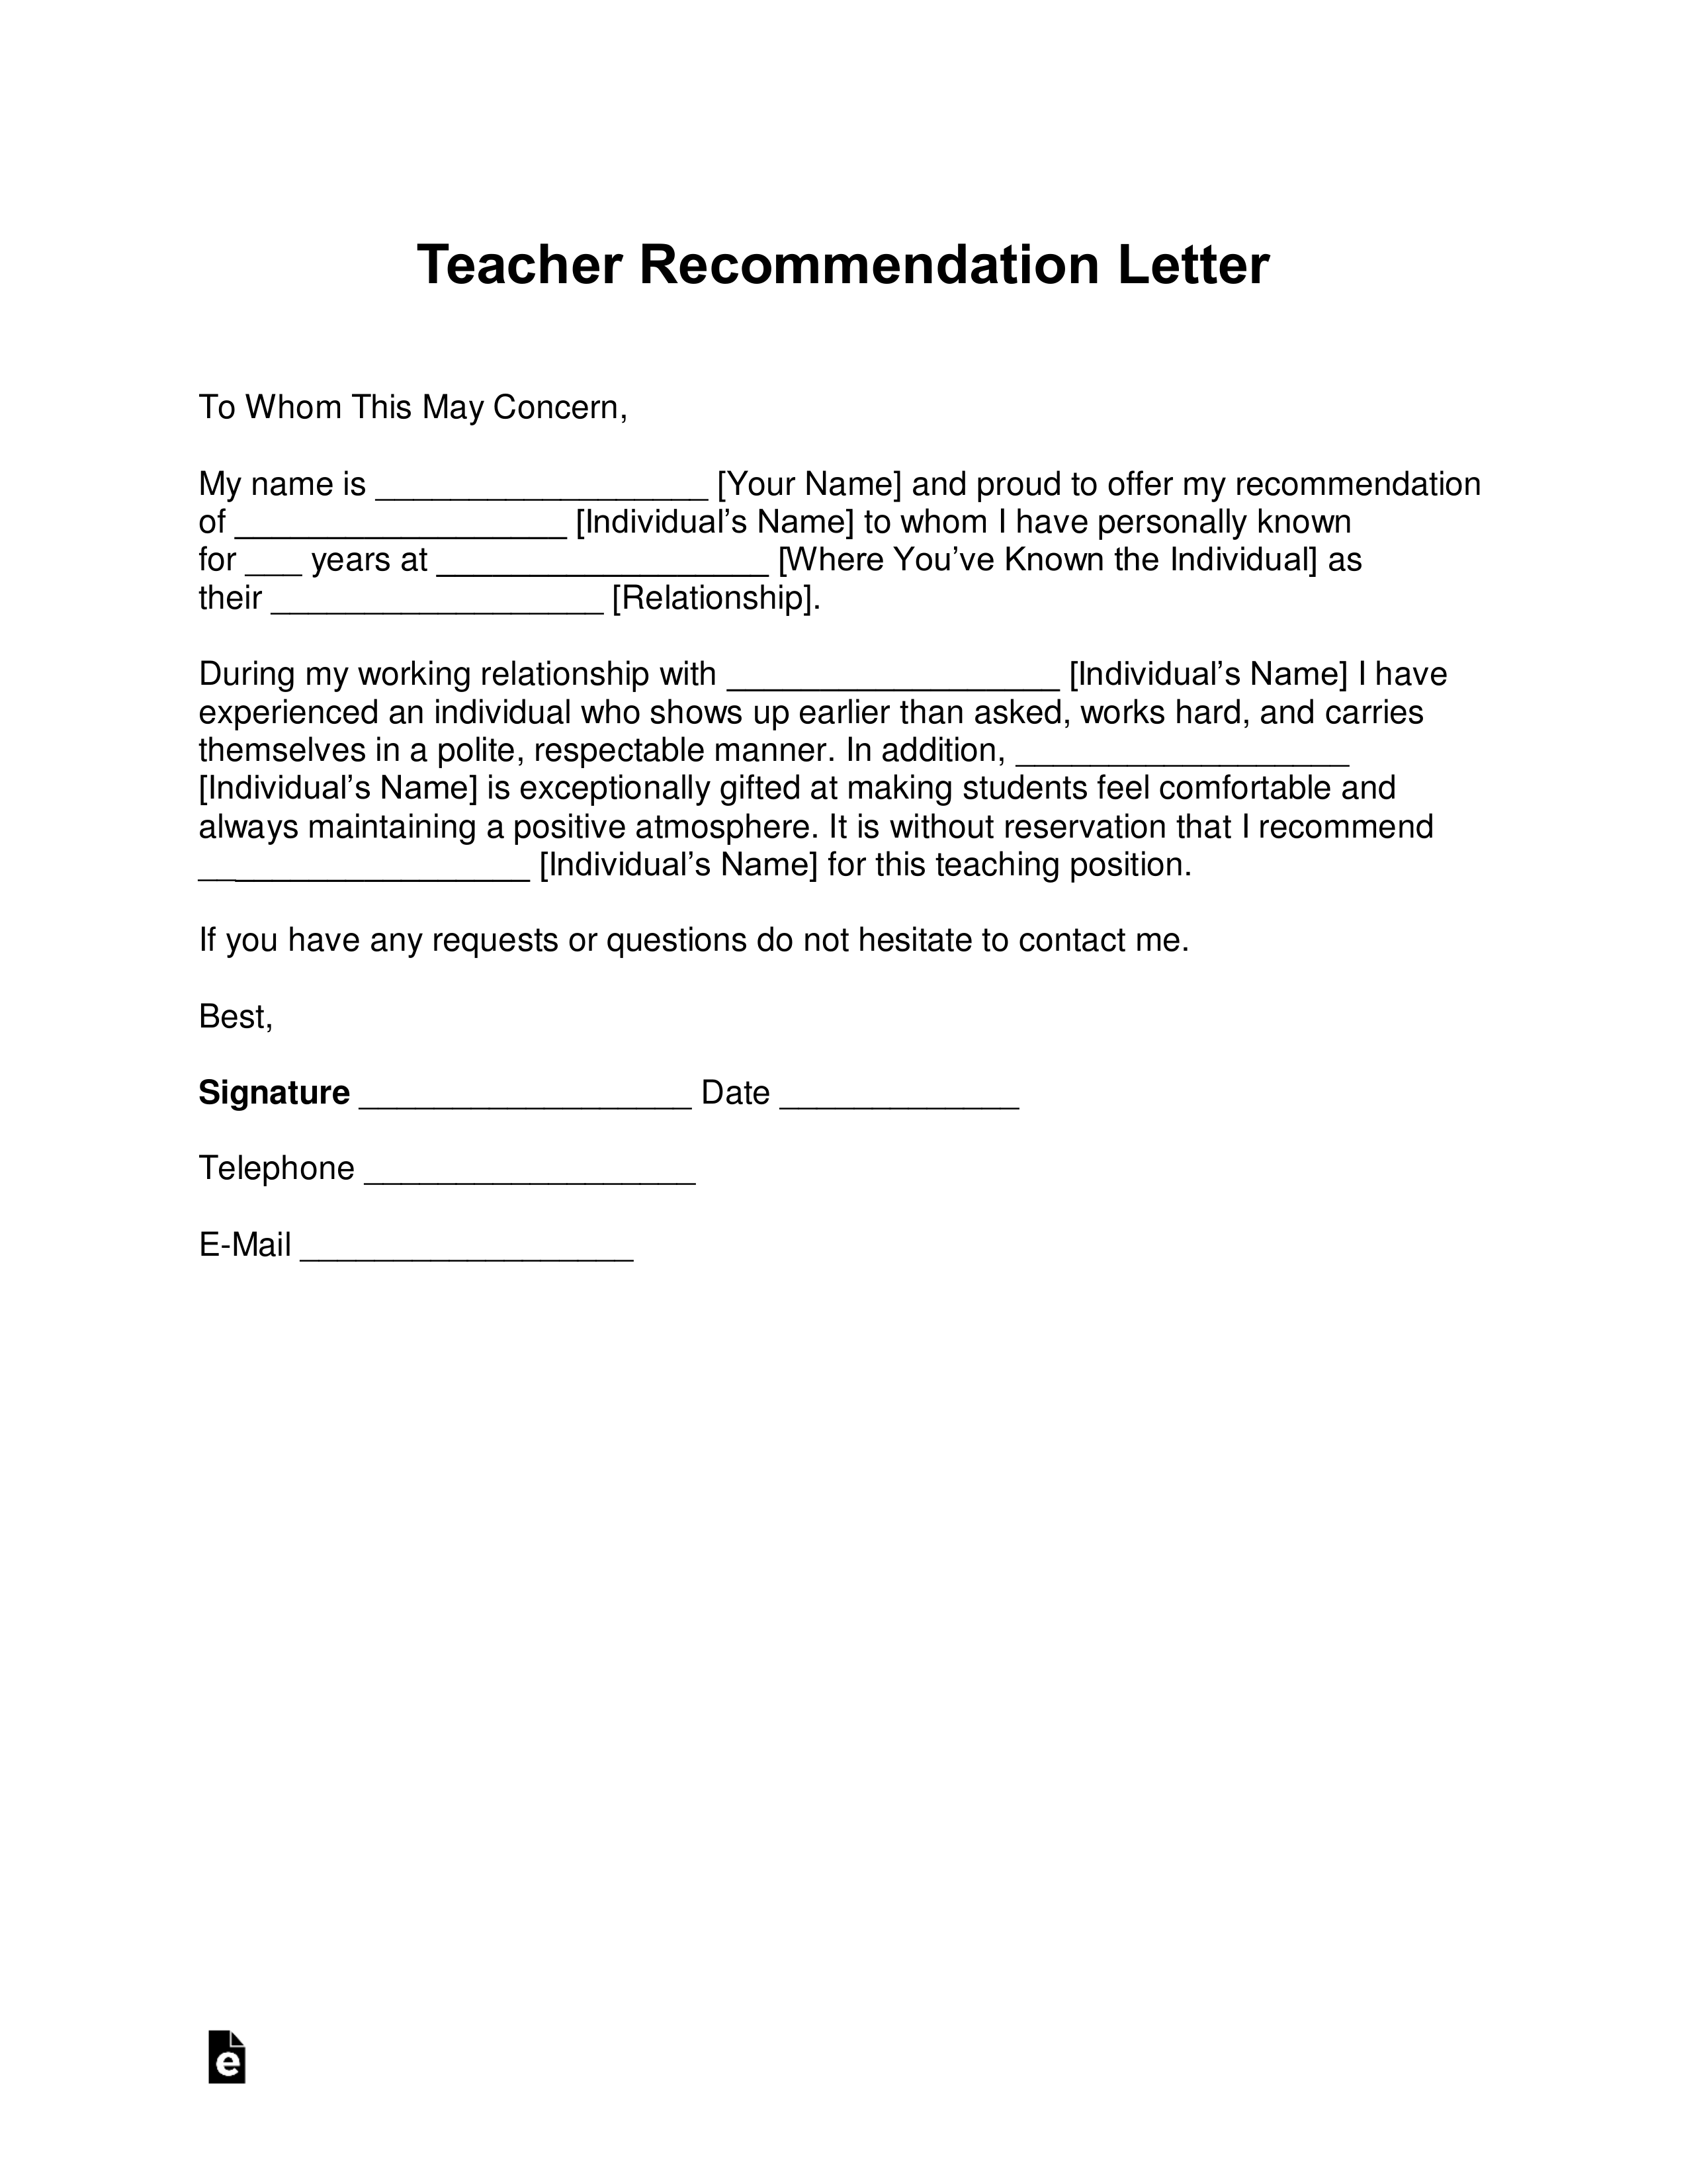 Free Teacher Recommendation Letter Template - with Samples - PDF Within Applied Physics Letters Template Word